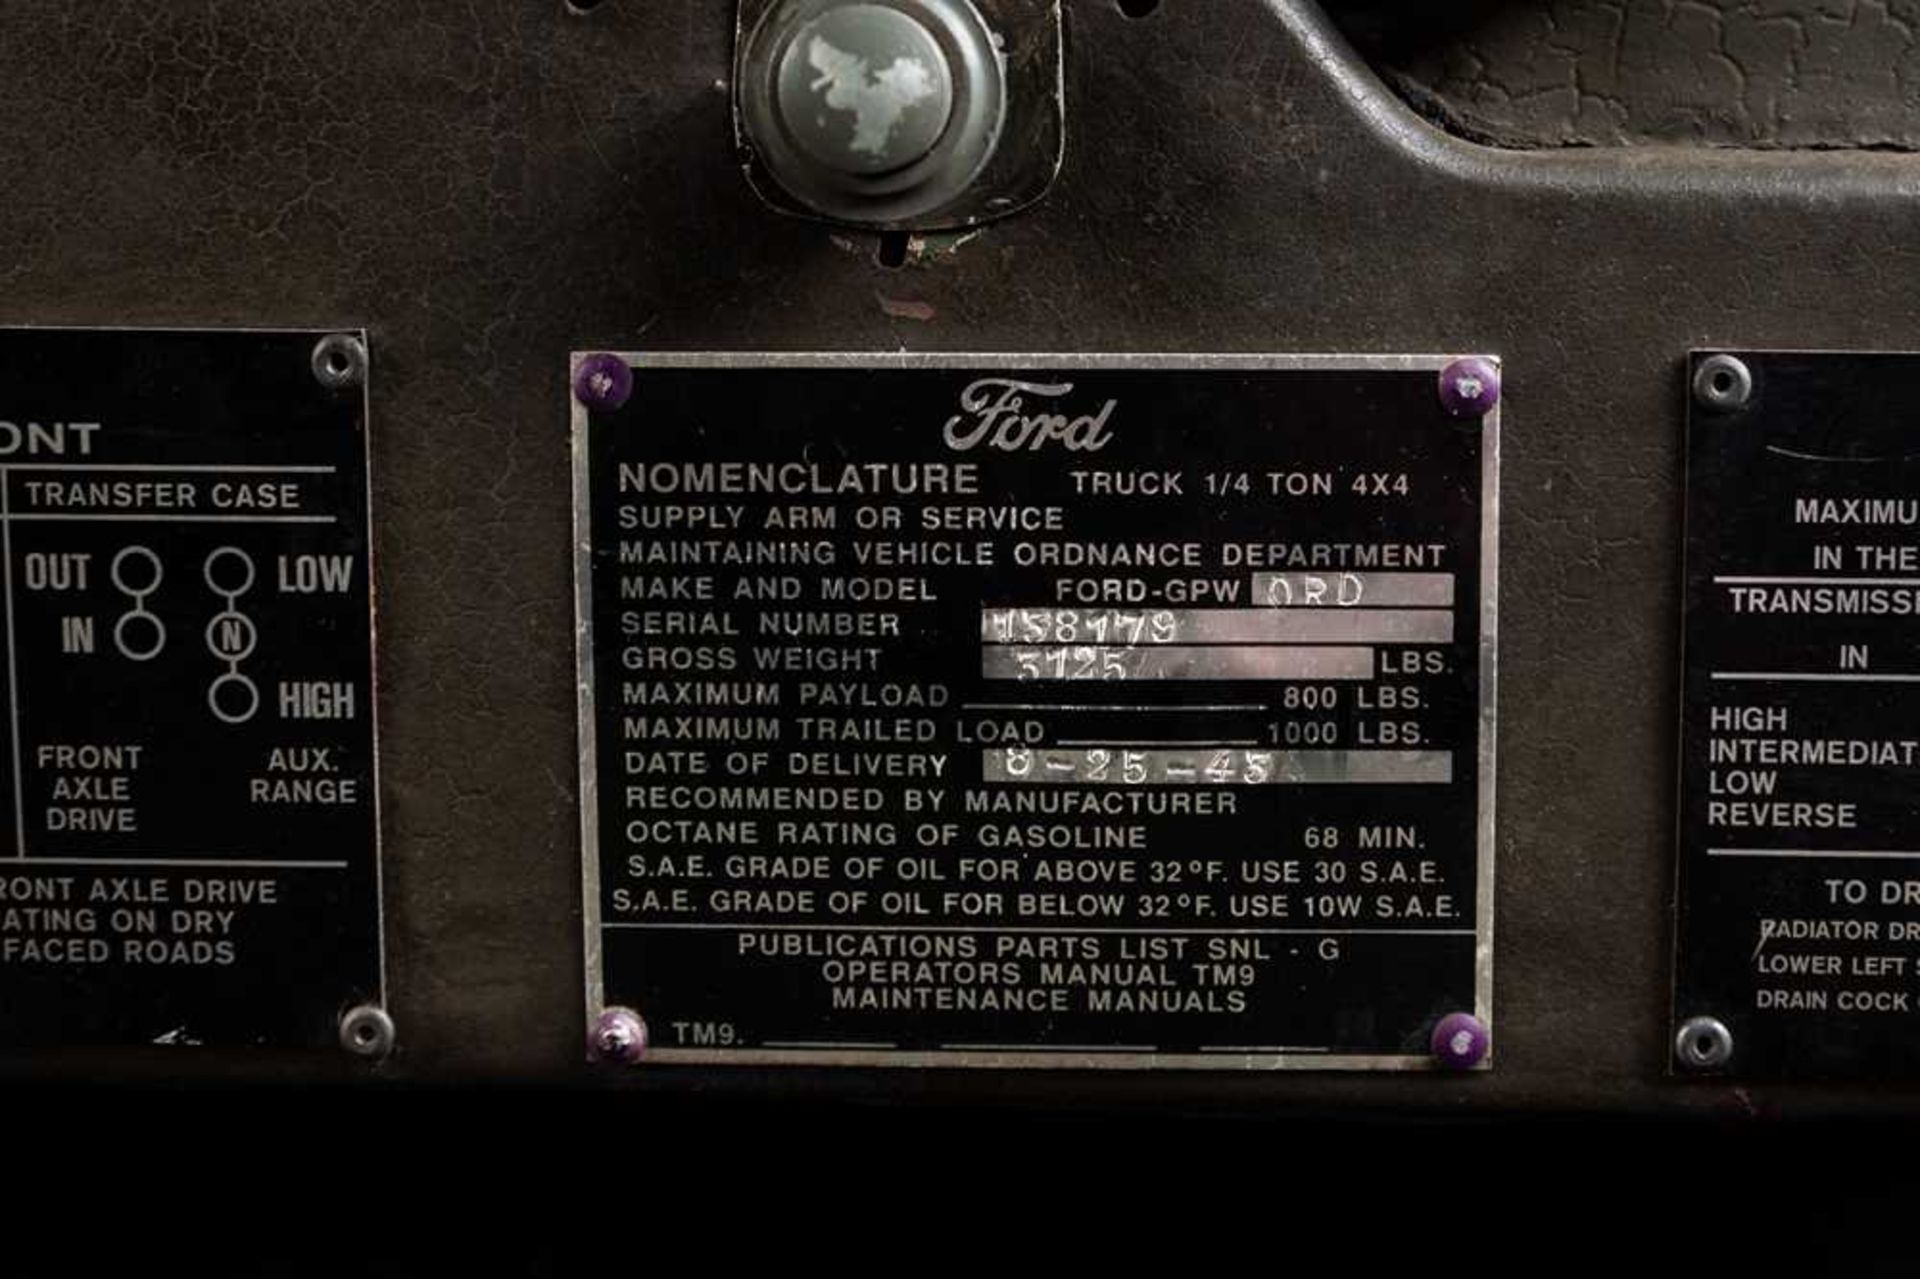 1943 Ford GPW Jeep Formerly the Property of Oscar Winner Rex Harrison - Image 36 of 88